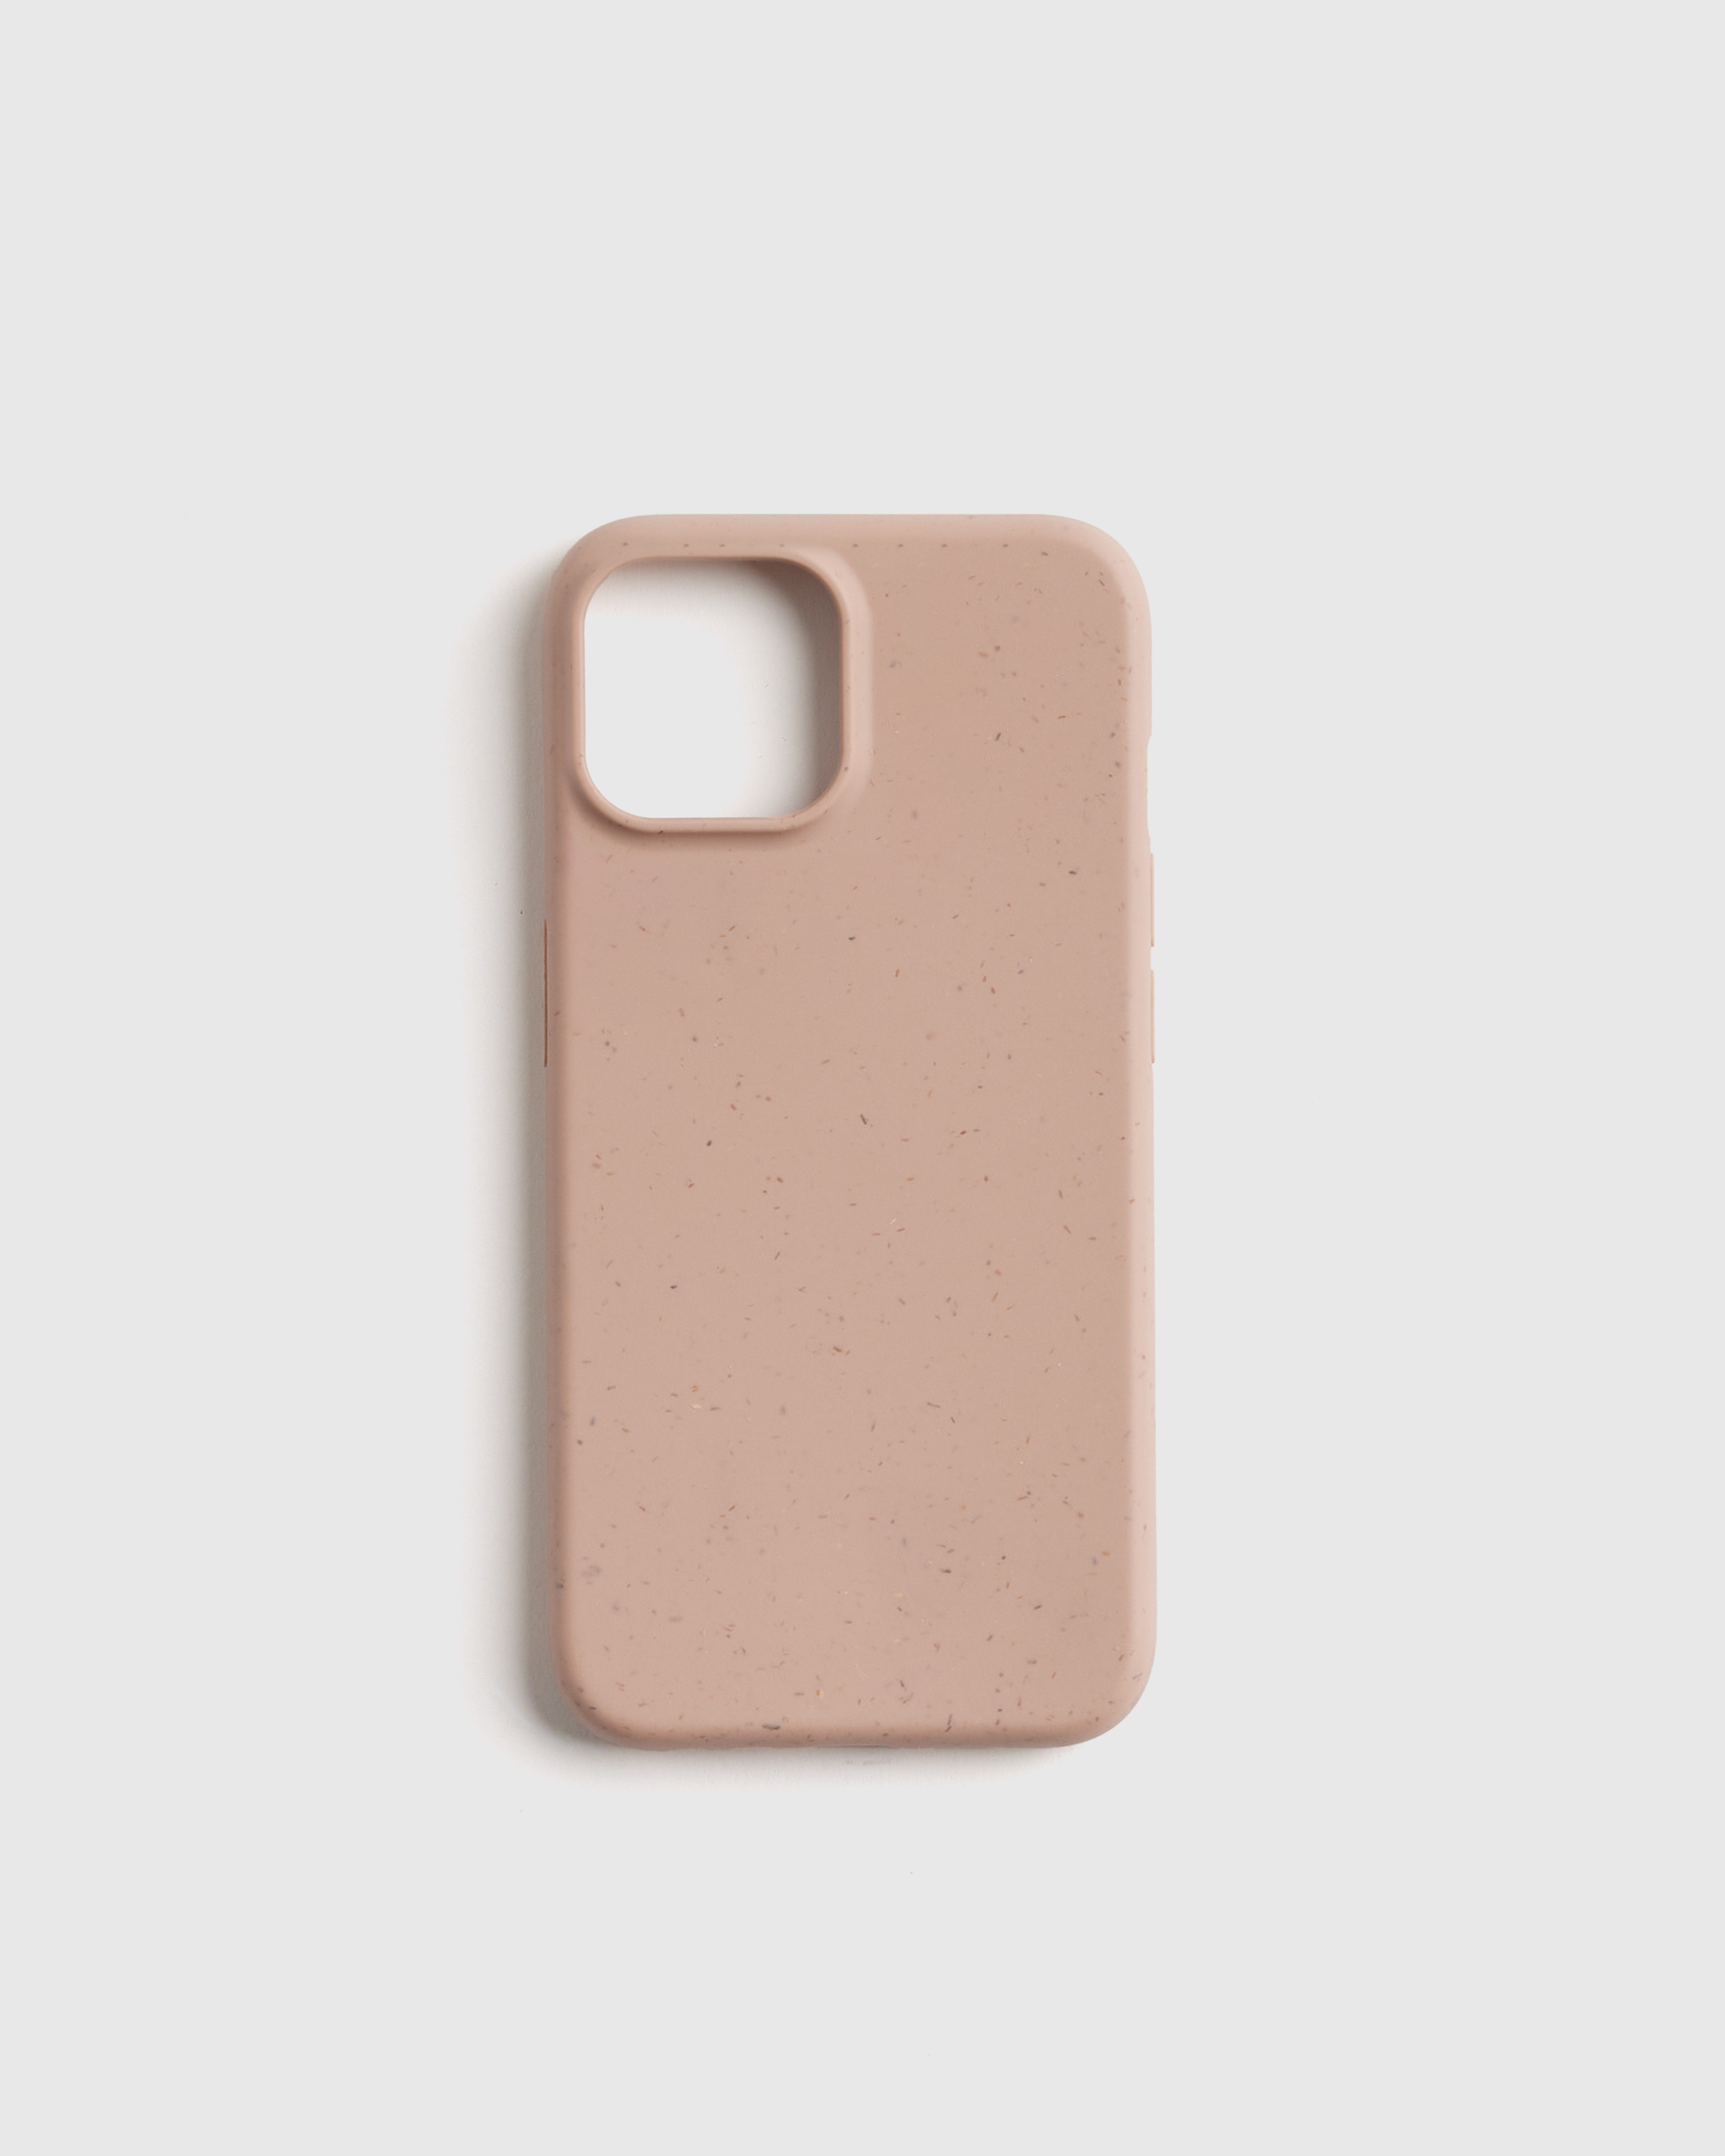 Quince Biodegradable Iphone Case In Blush Pink